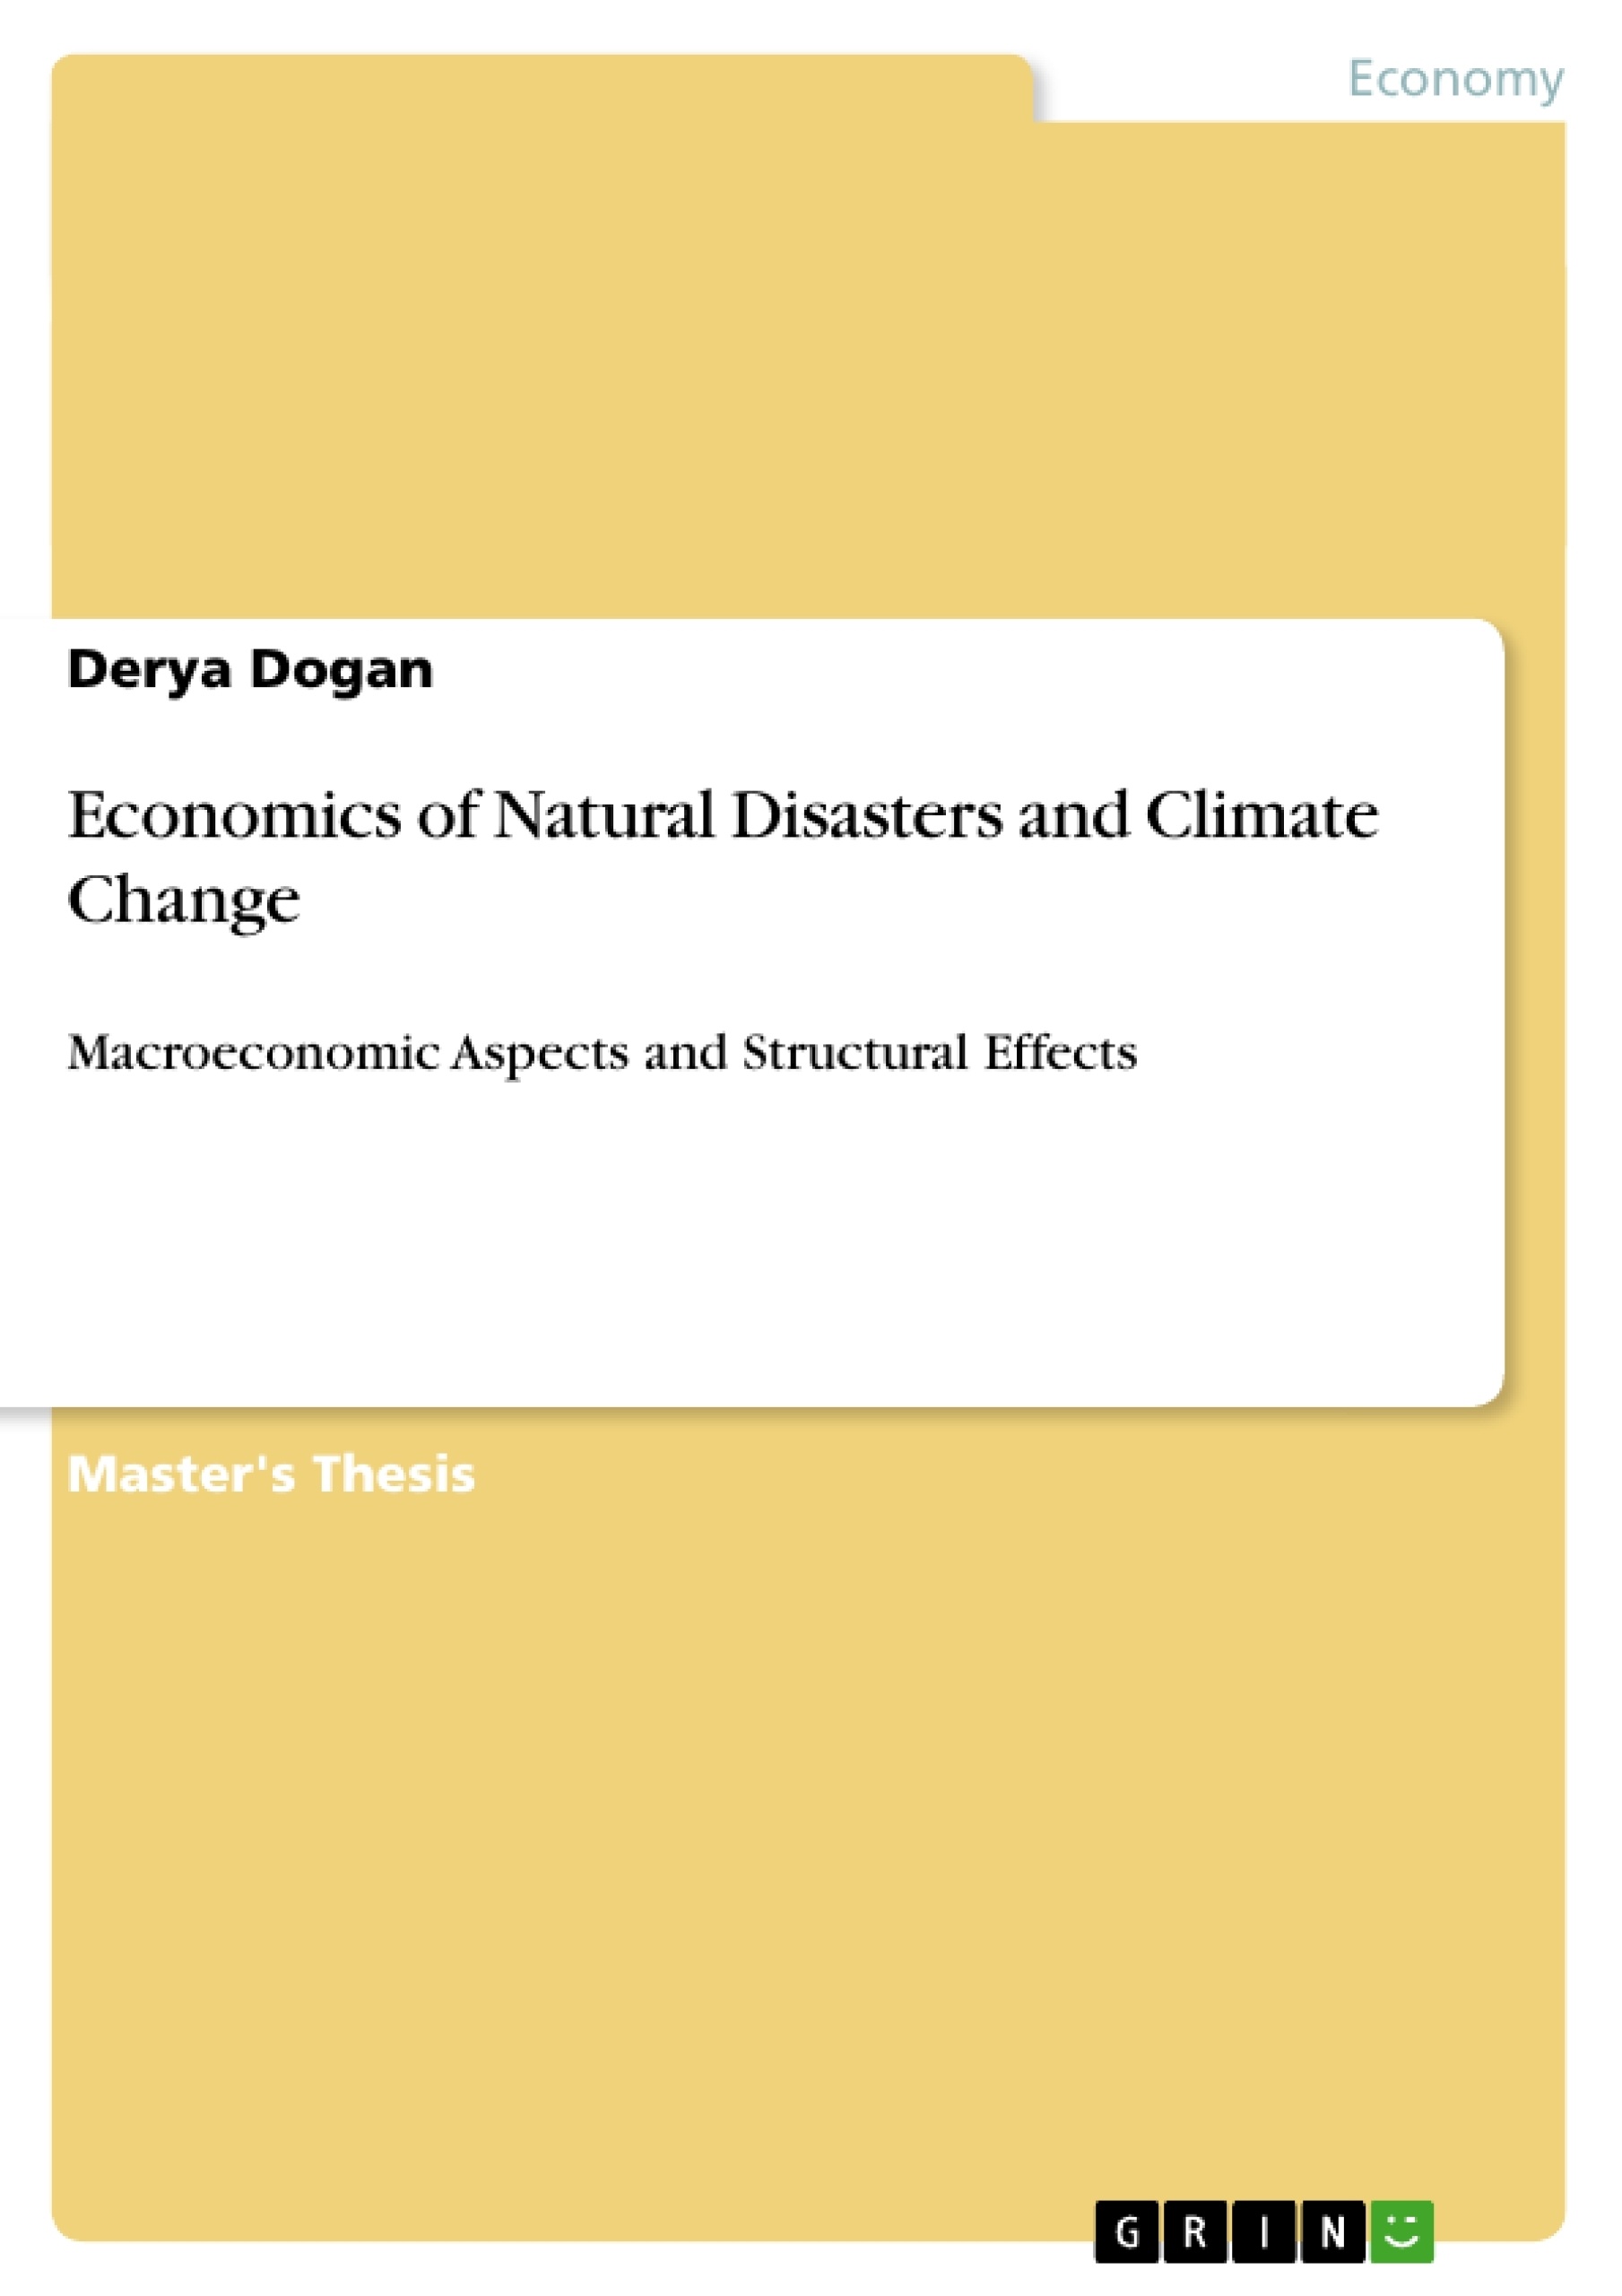 Title: Economics of Natural Disasters and Climate Change